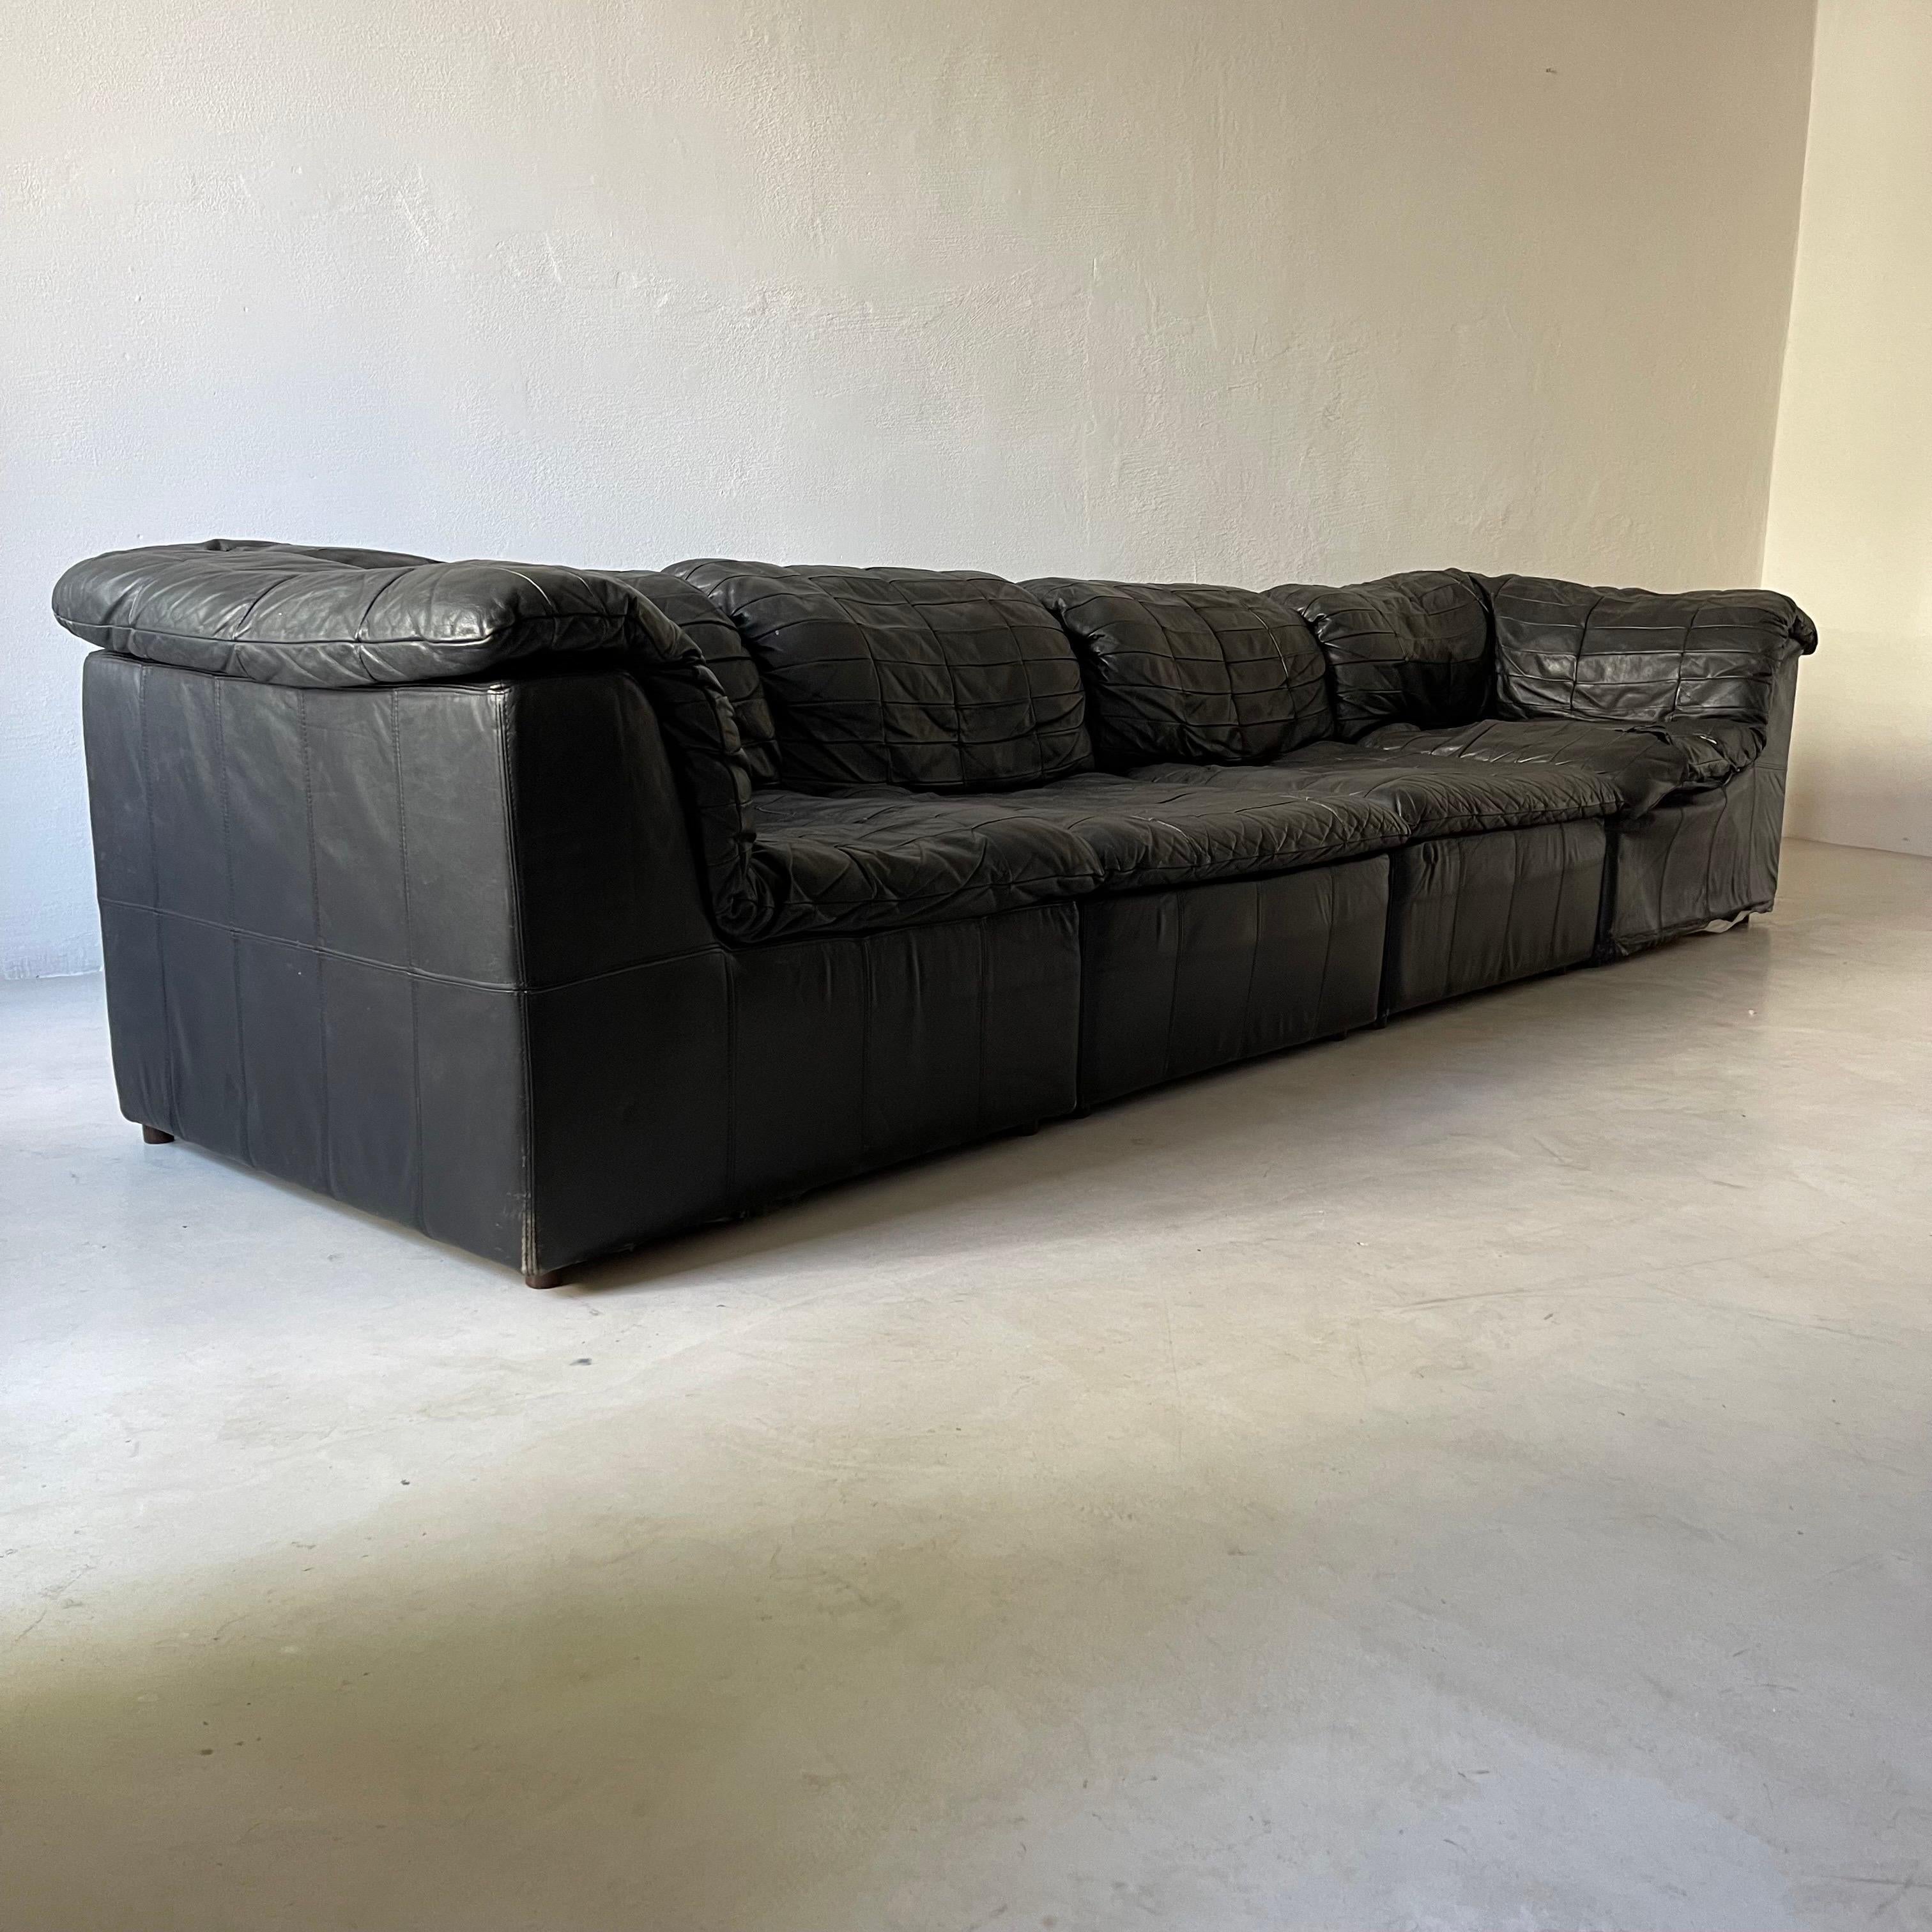 
Laauser Vintage Leather Patchwork Sectional Sofa, Germany 1970s. Very cool looking and comfy vintage Laauser Sofa, that is inspired by the most famous patchwork sofa from De-Sede: DS11. We like this vintage gem a lot, as the seating depth is a bit